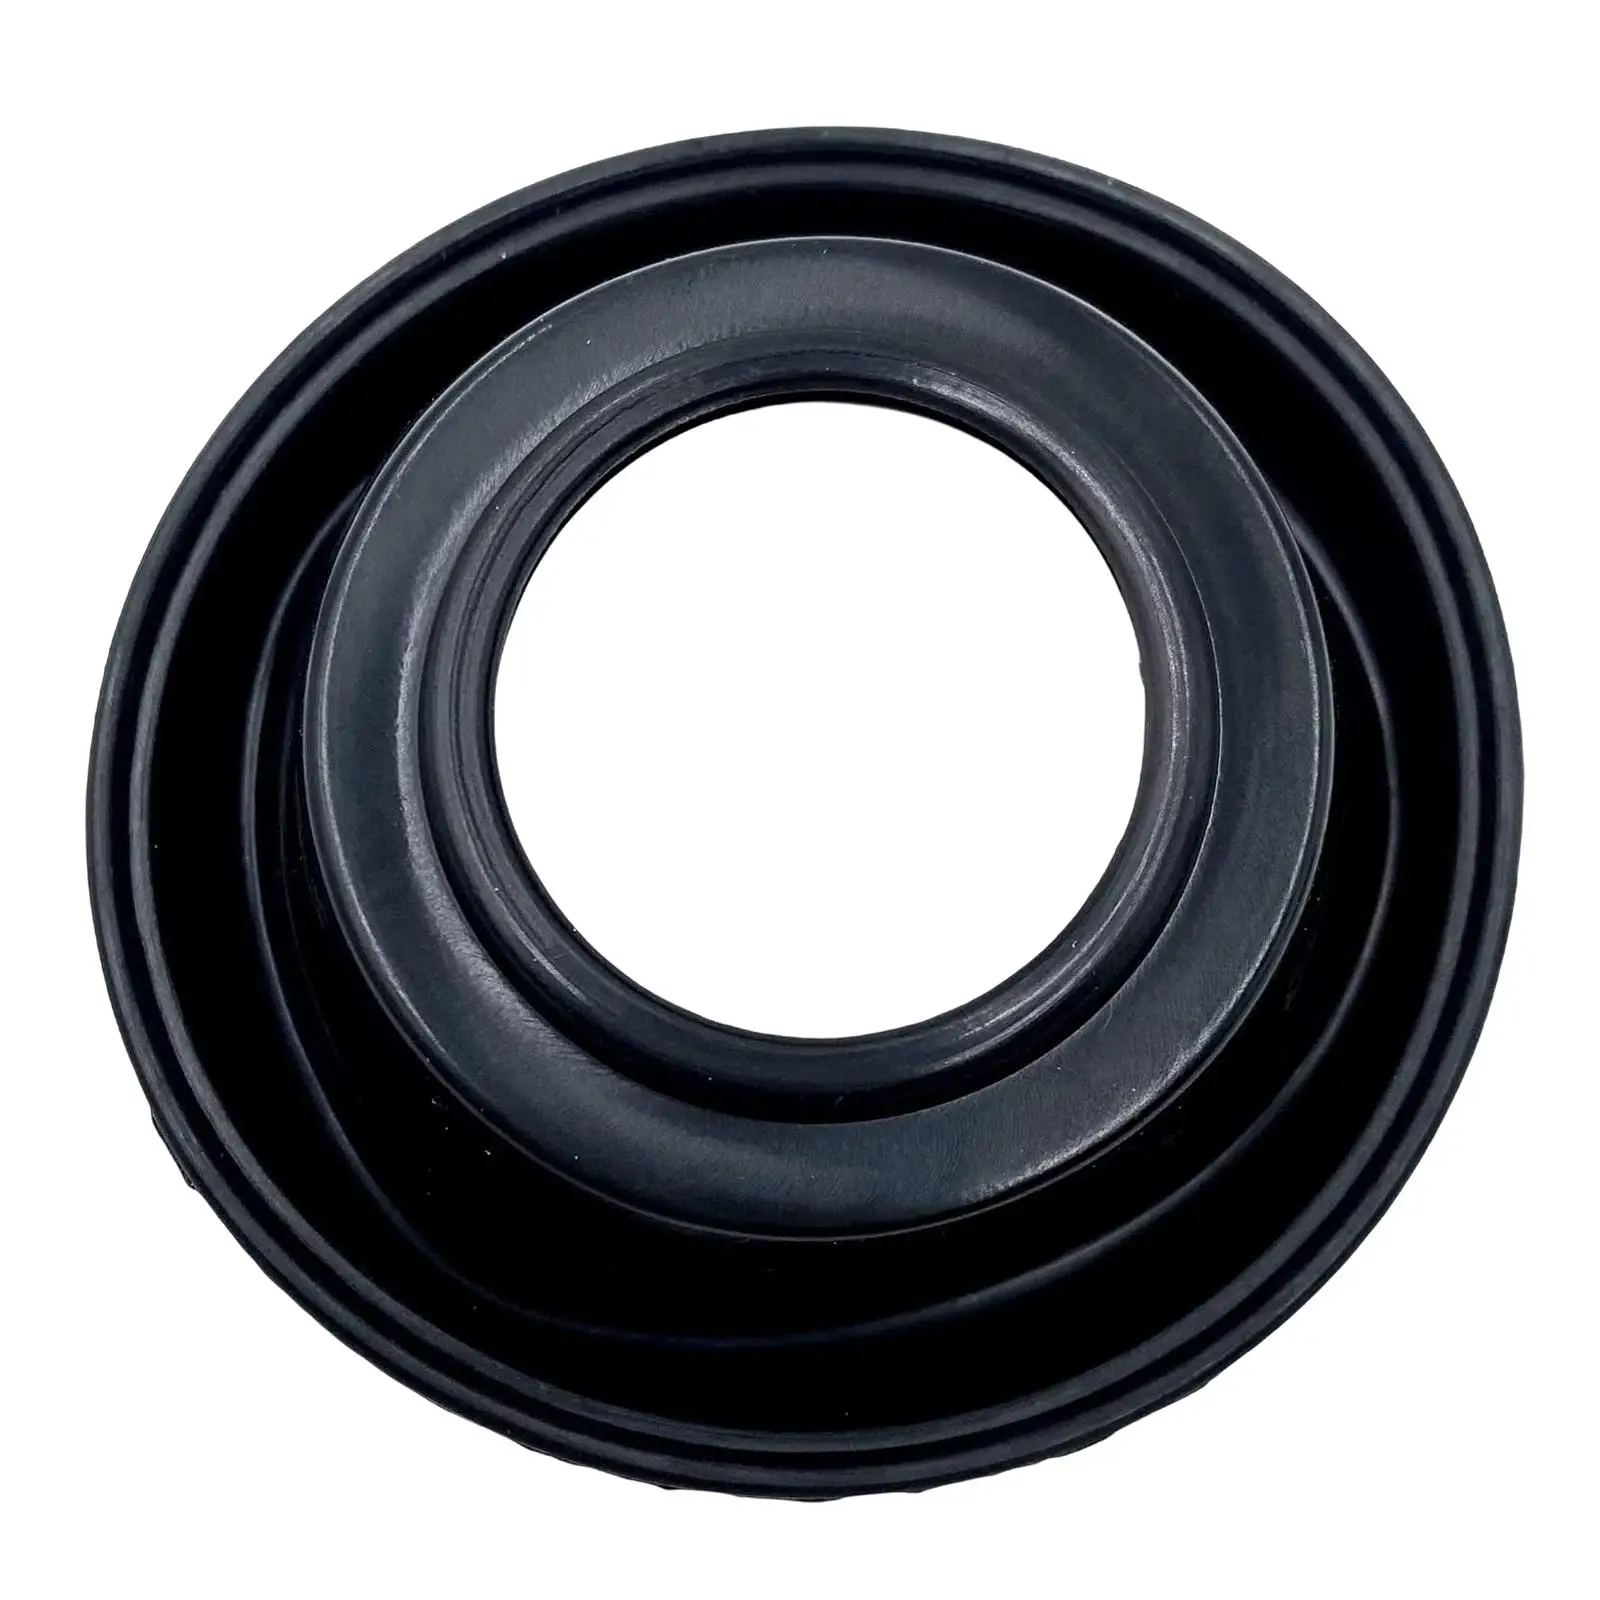 Diaphragm Rubber 3130910 Replacement Fits for 500 Worker